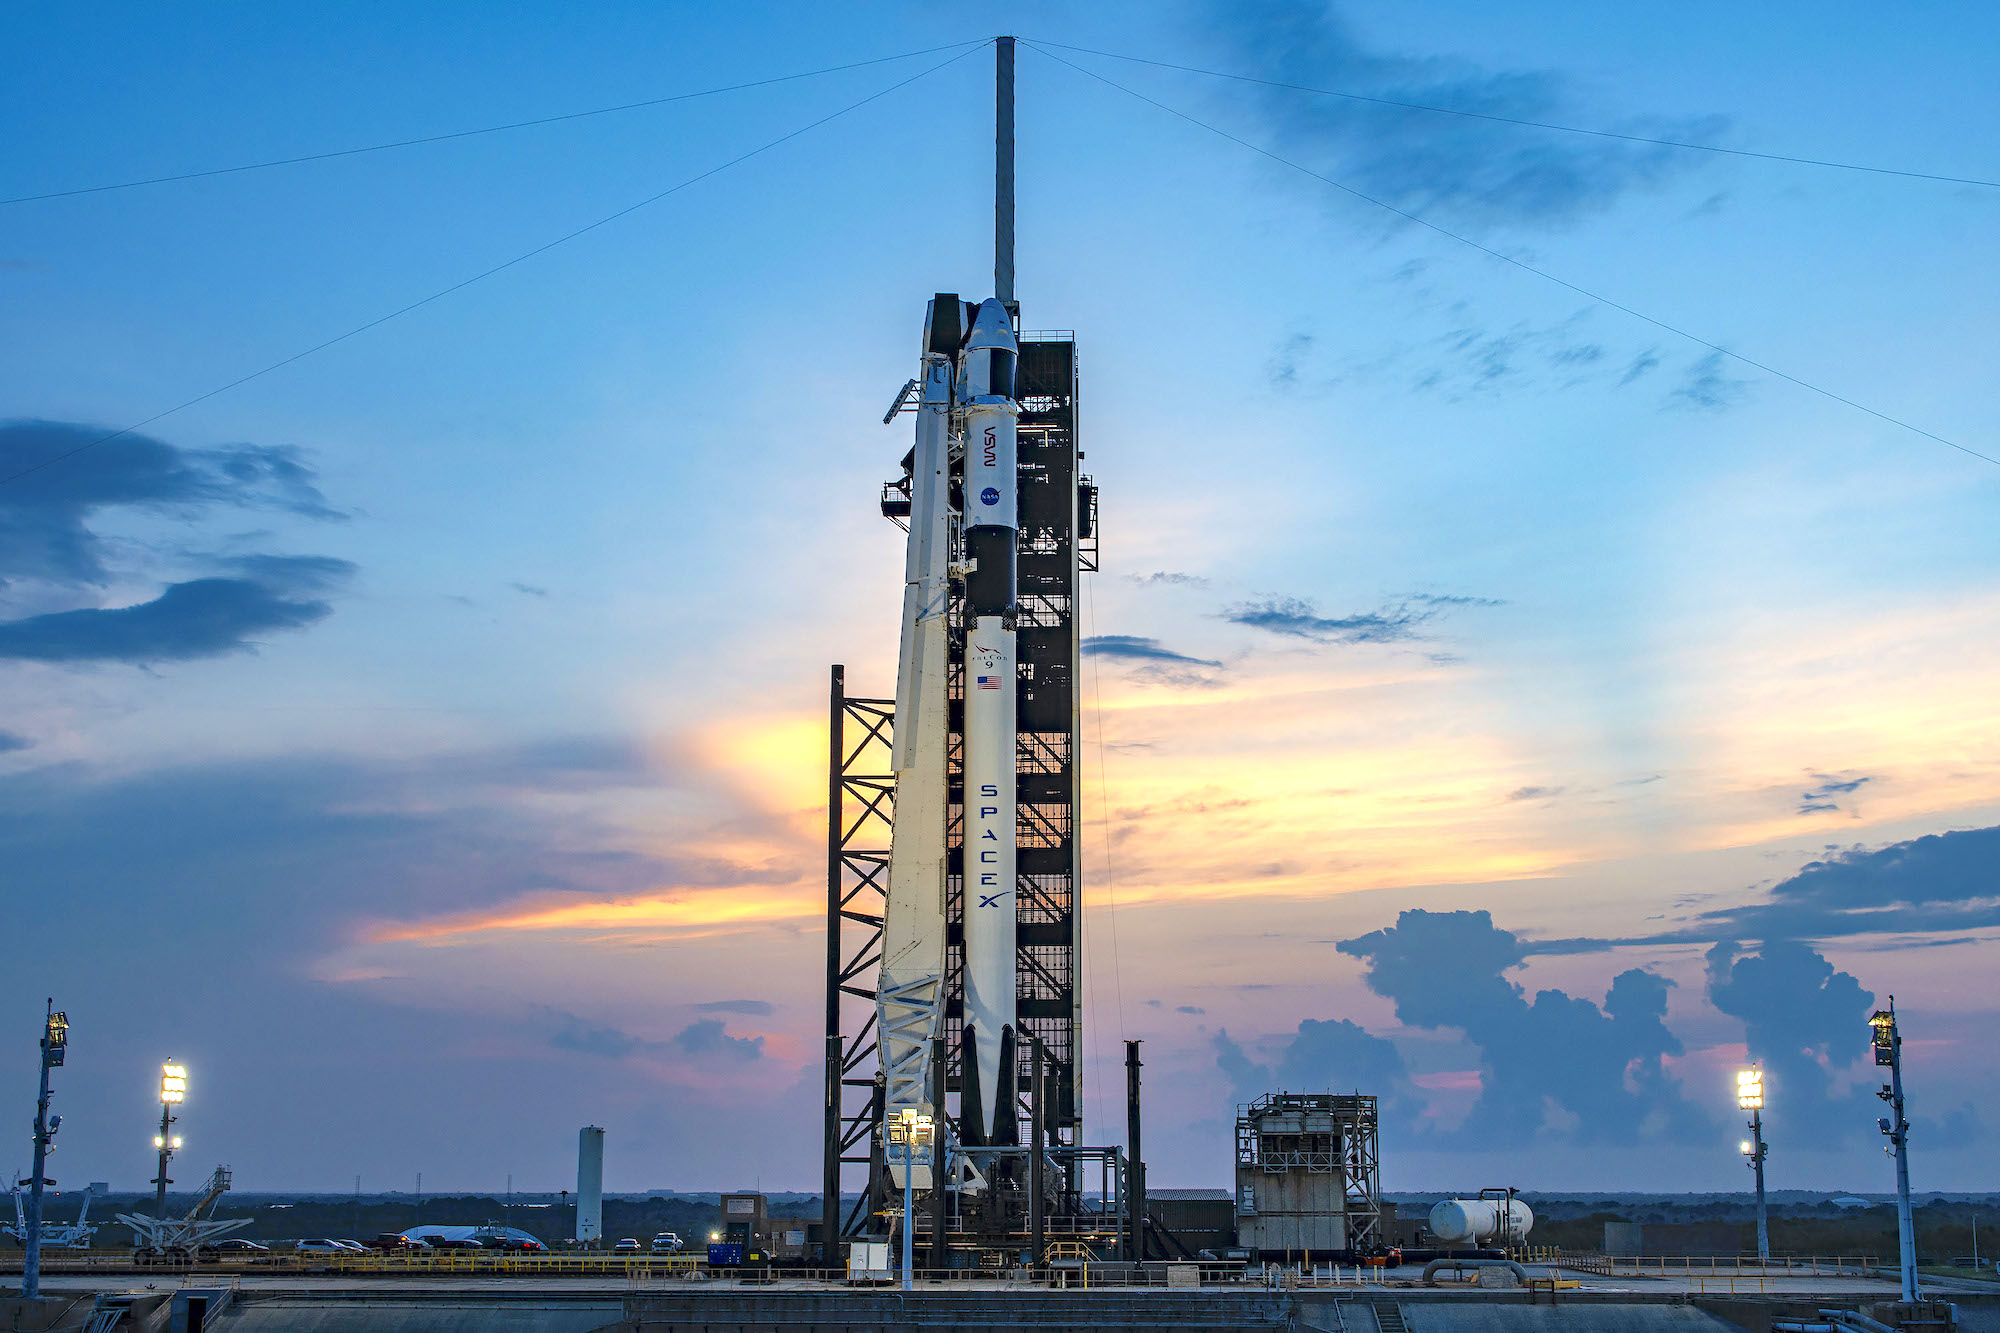 Crew-7's Falcon 9 rocket and Dragon spacecraft on the launchpad.